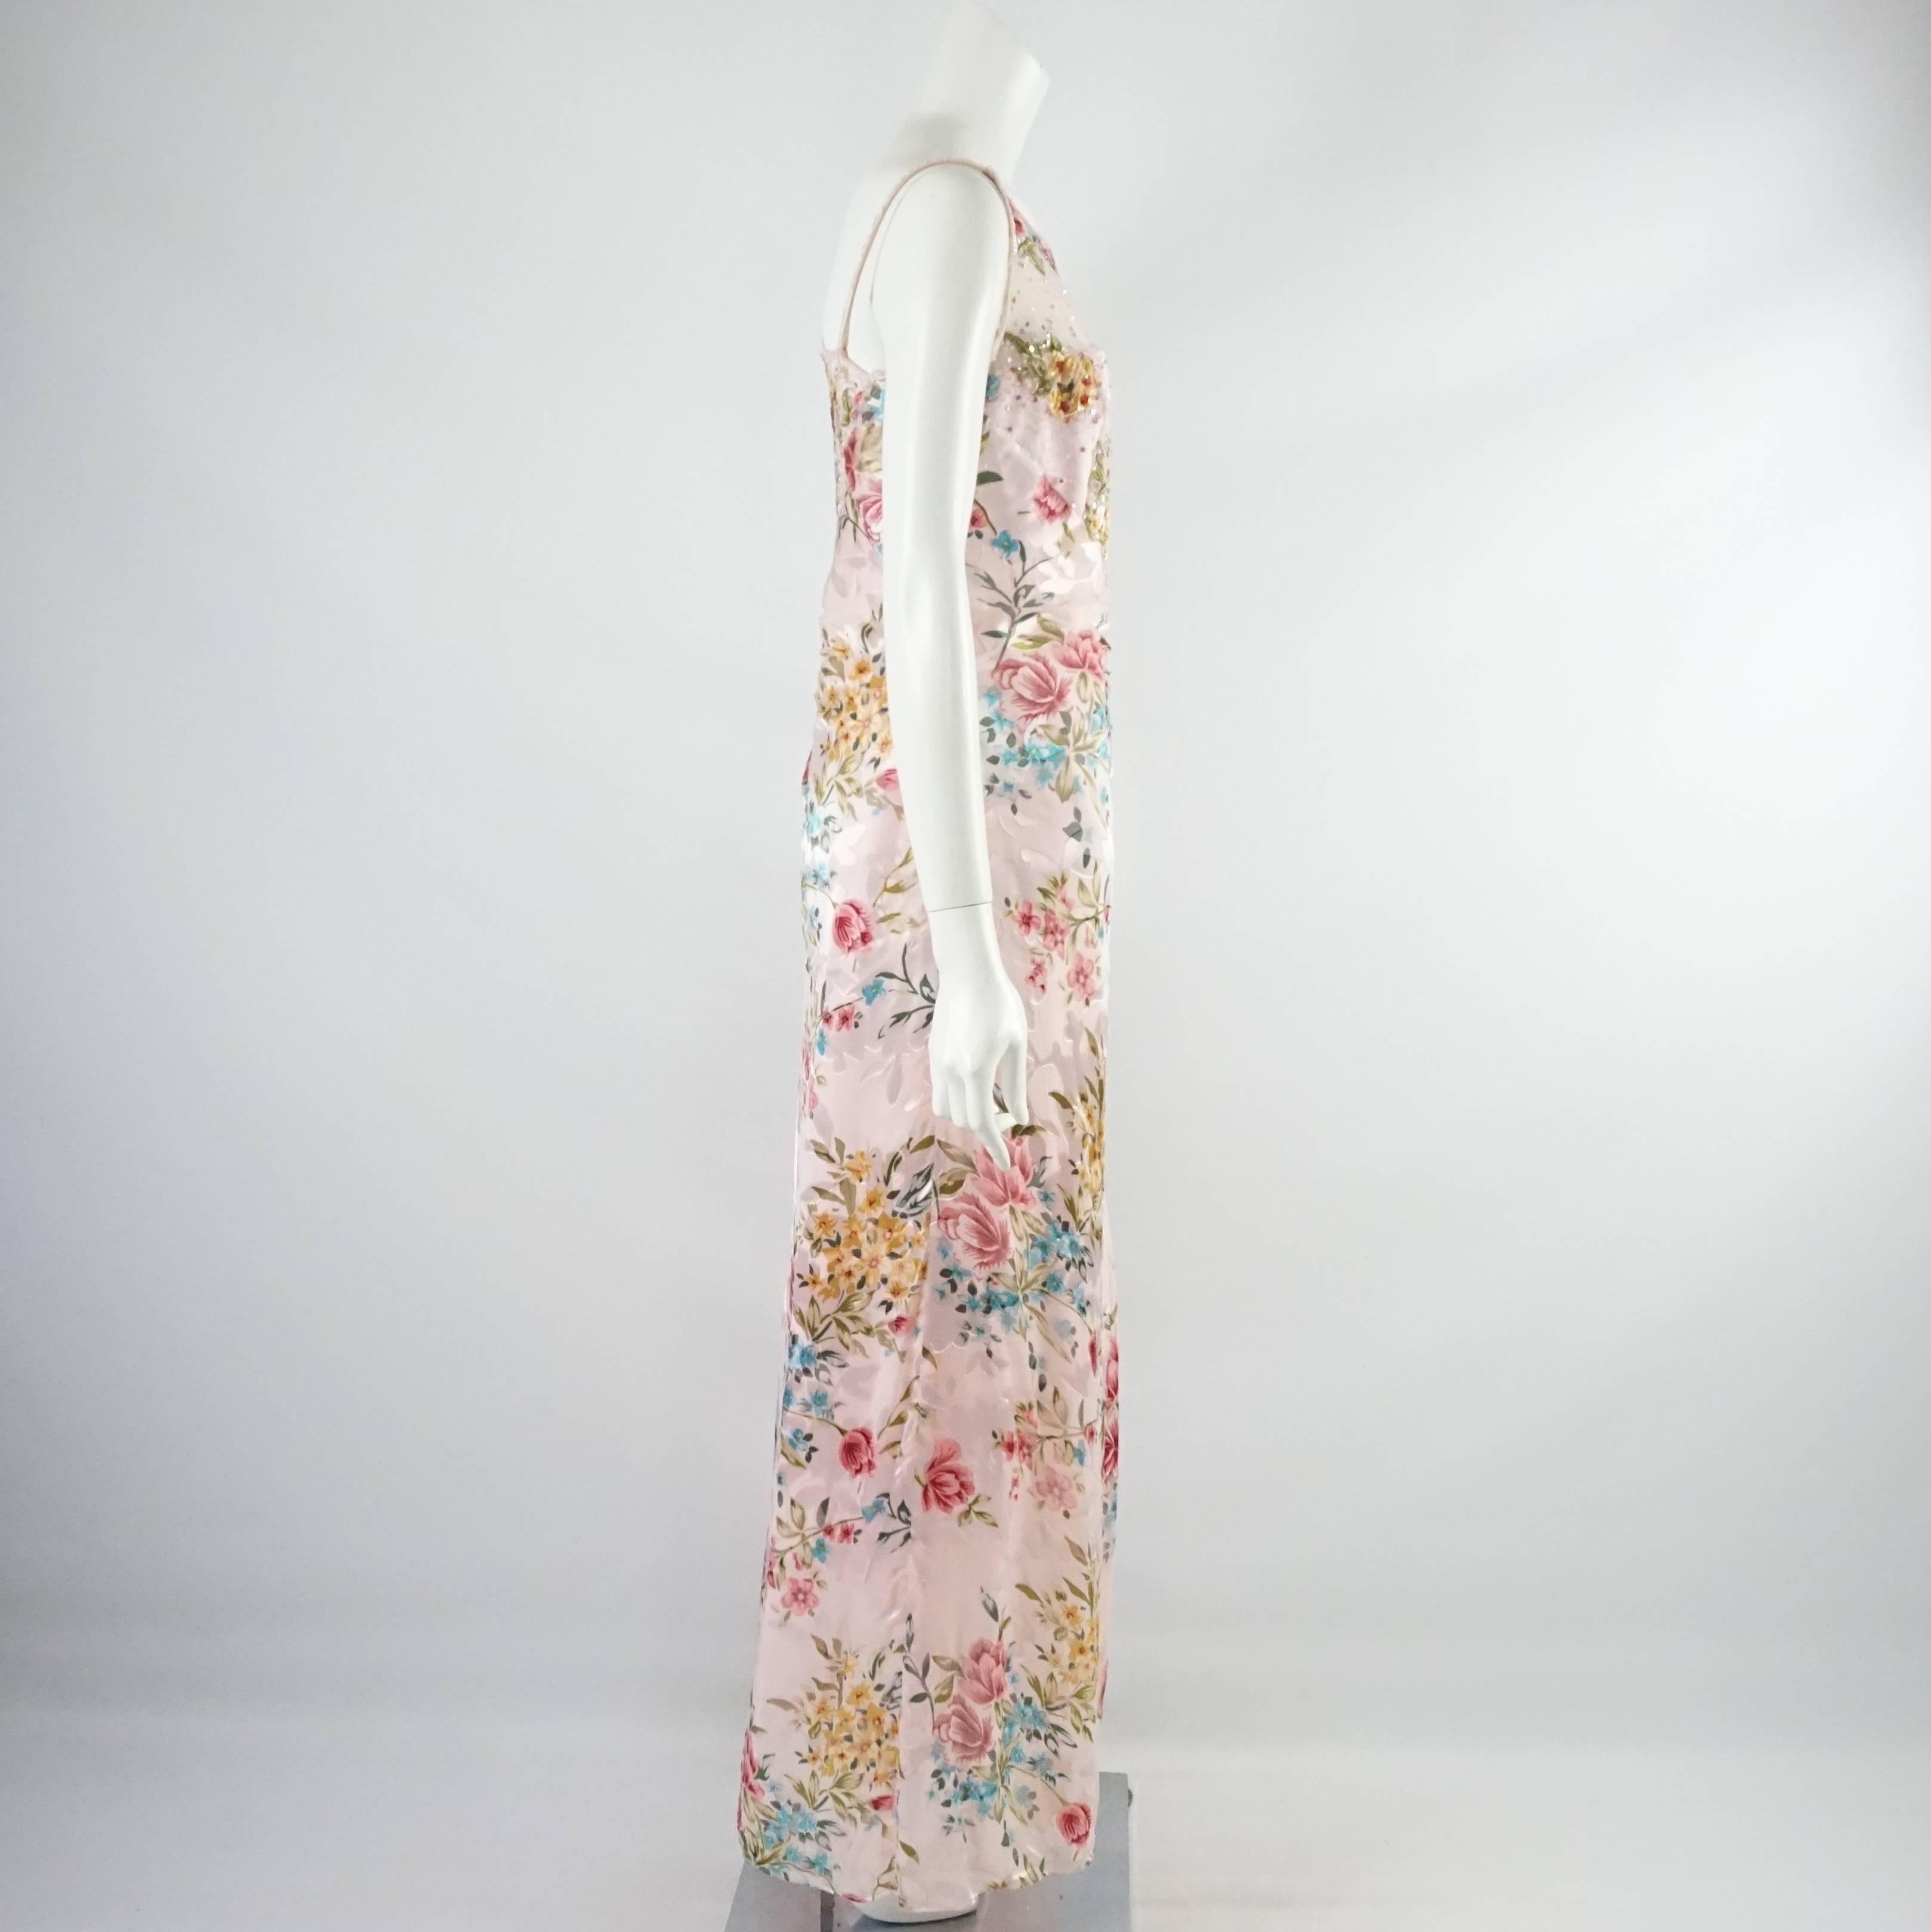 This Bellville Sassoon gown is pink silk with a floral beaded design. It is sleeveless and has a high neckline. This gown is in good condition with some loose and missing embellishments. Size 10.

Measurements
Bust: 34